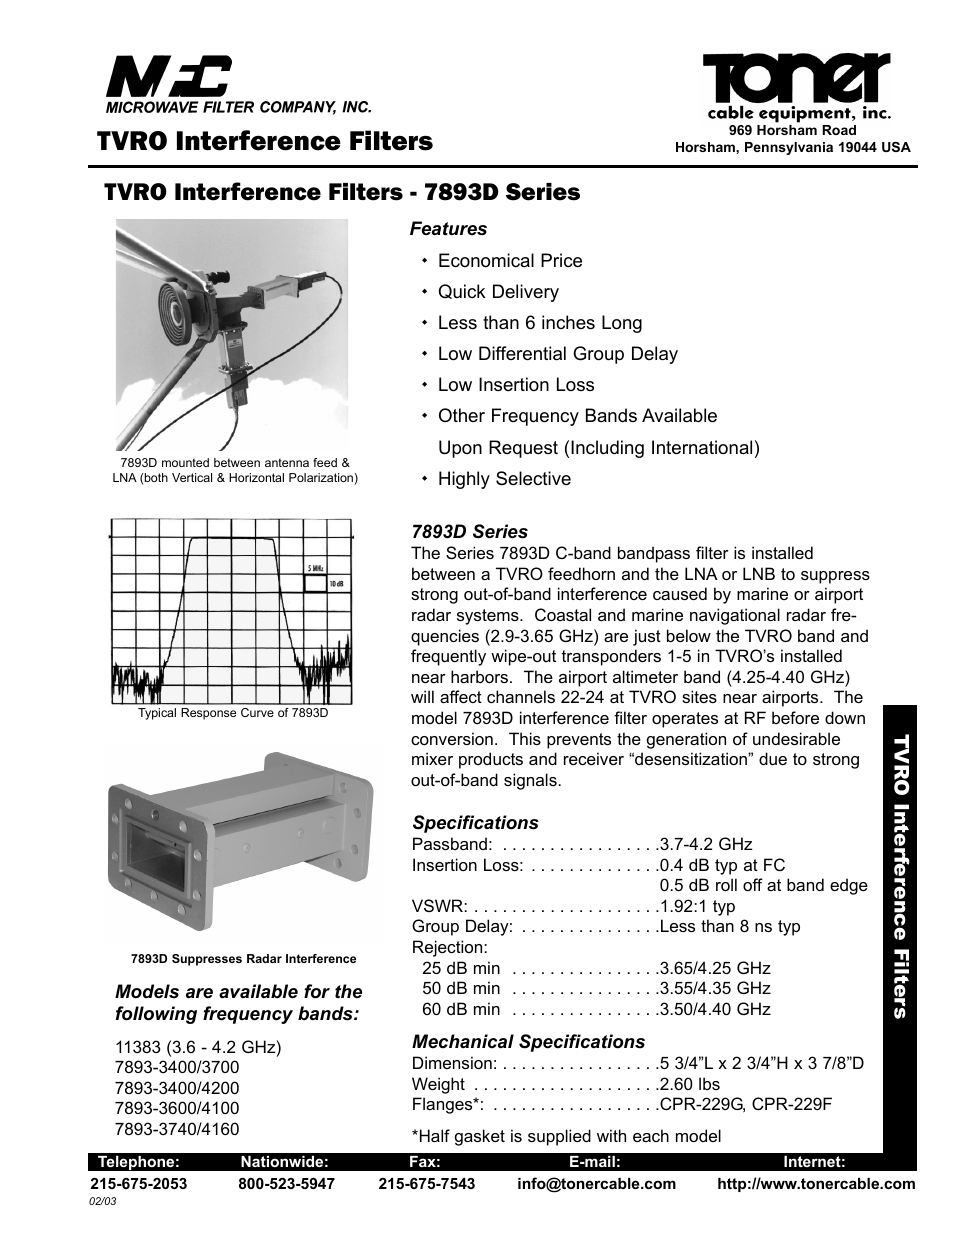 7893D Series TVRO Interference Filter